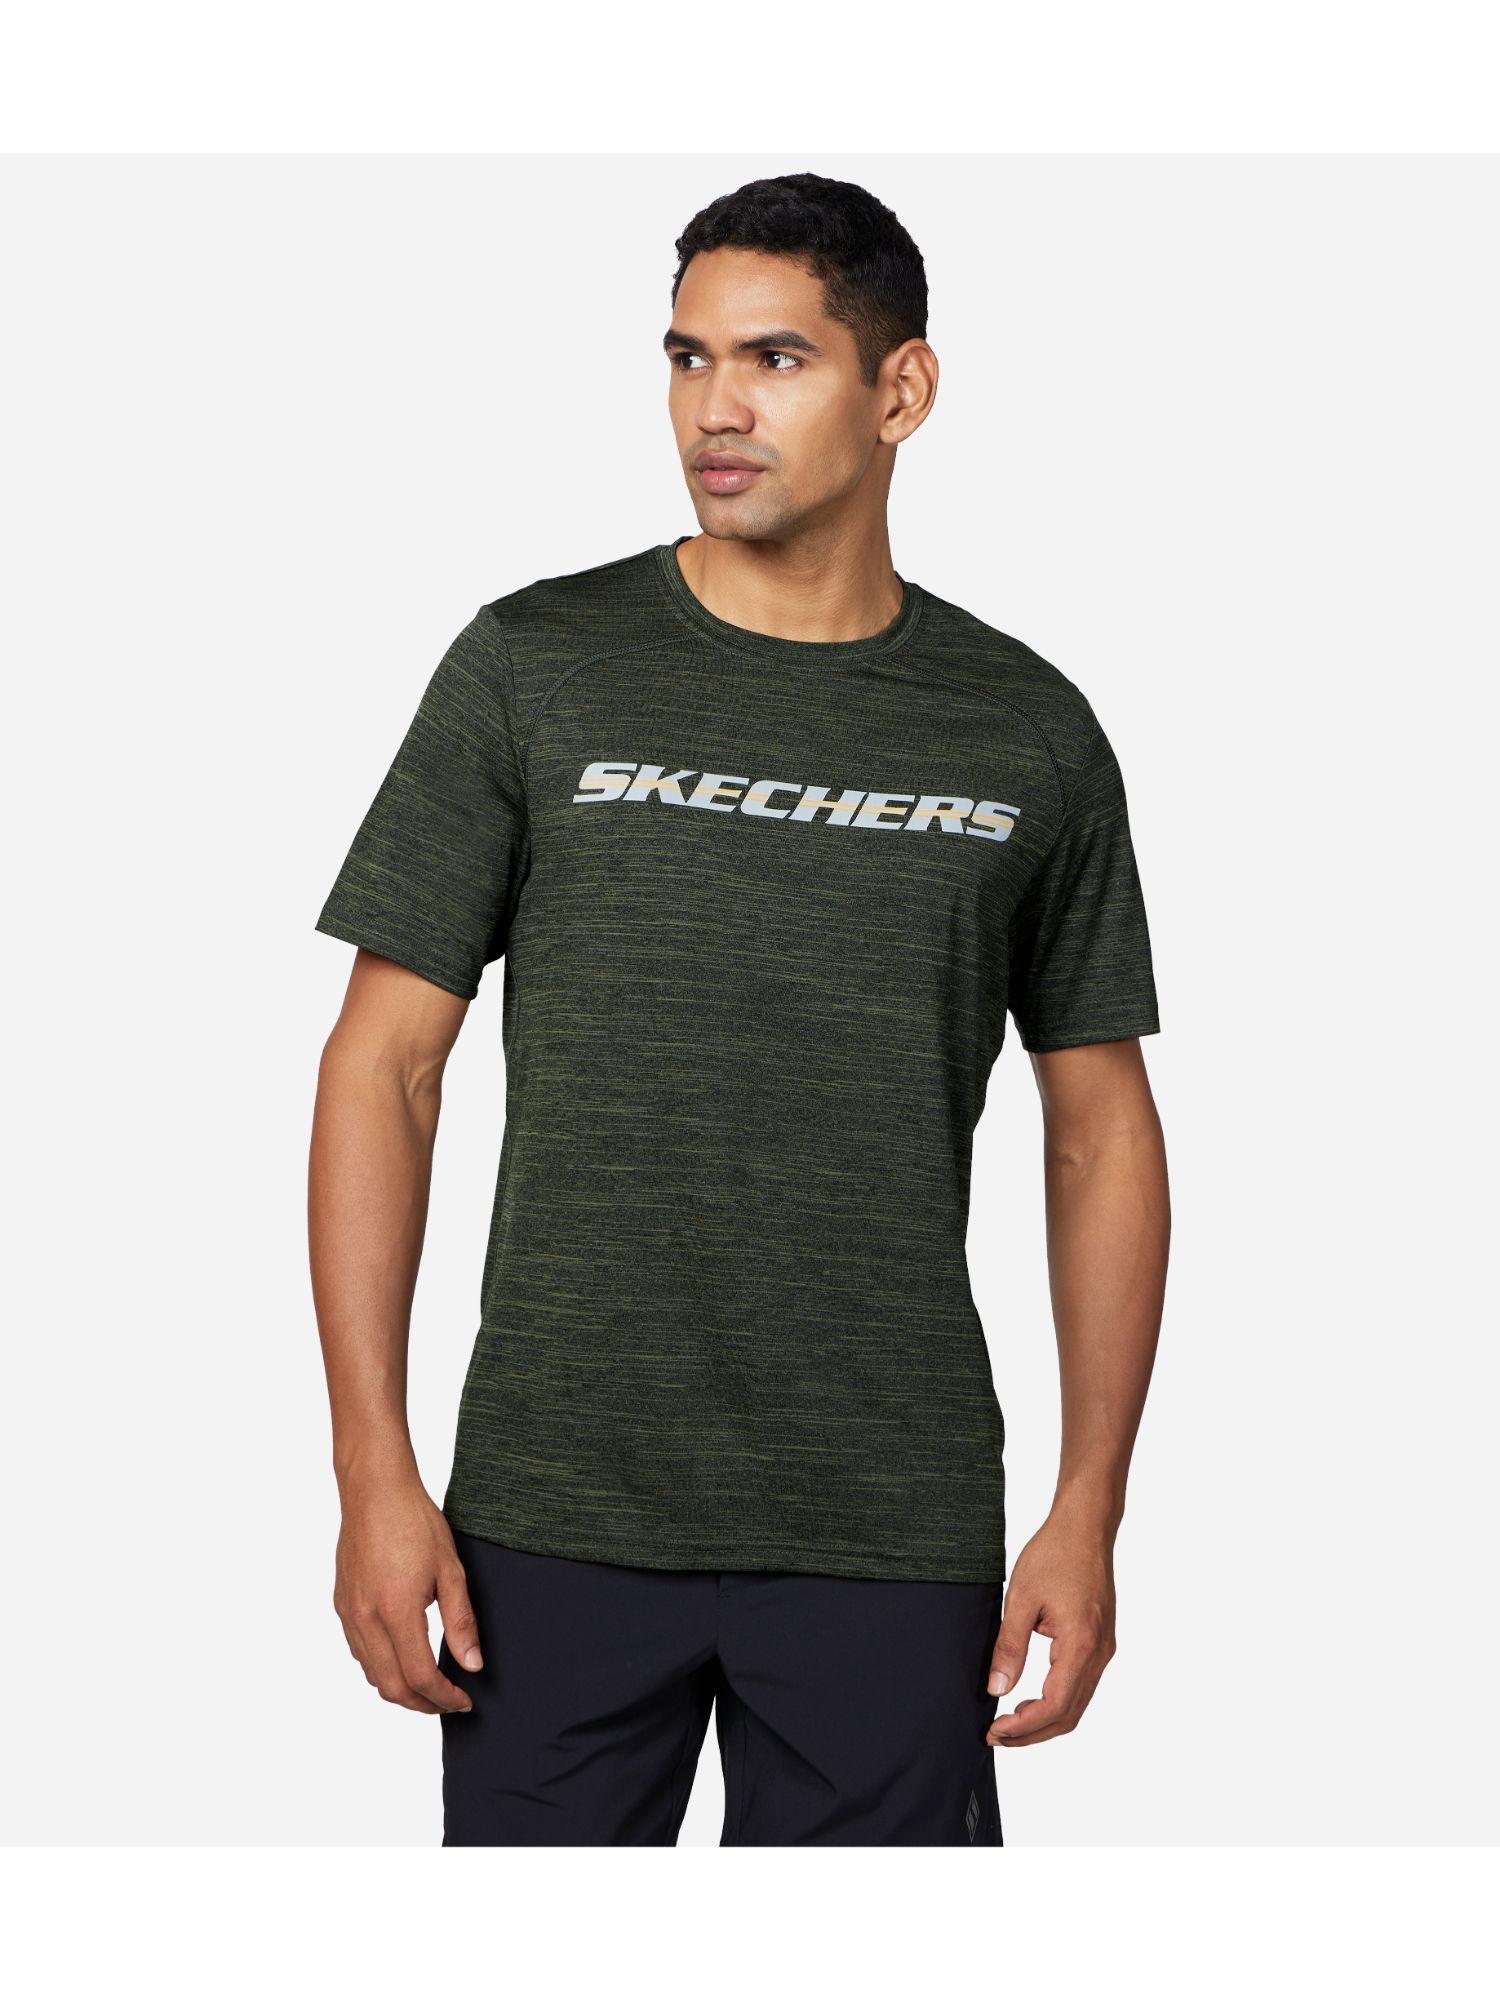 on-the-road-motion-tee-t-shirt-olive-green